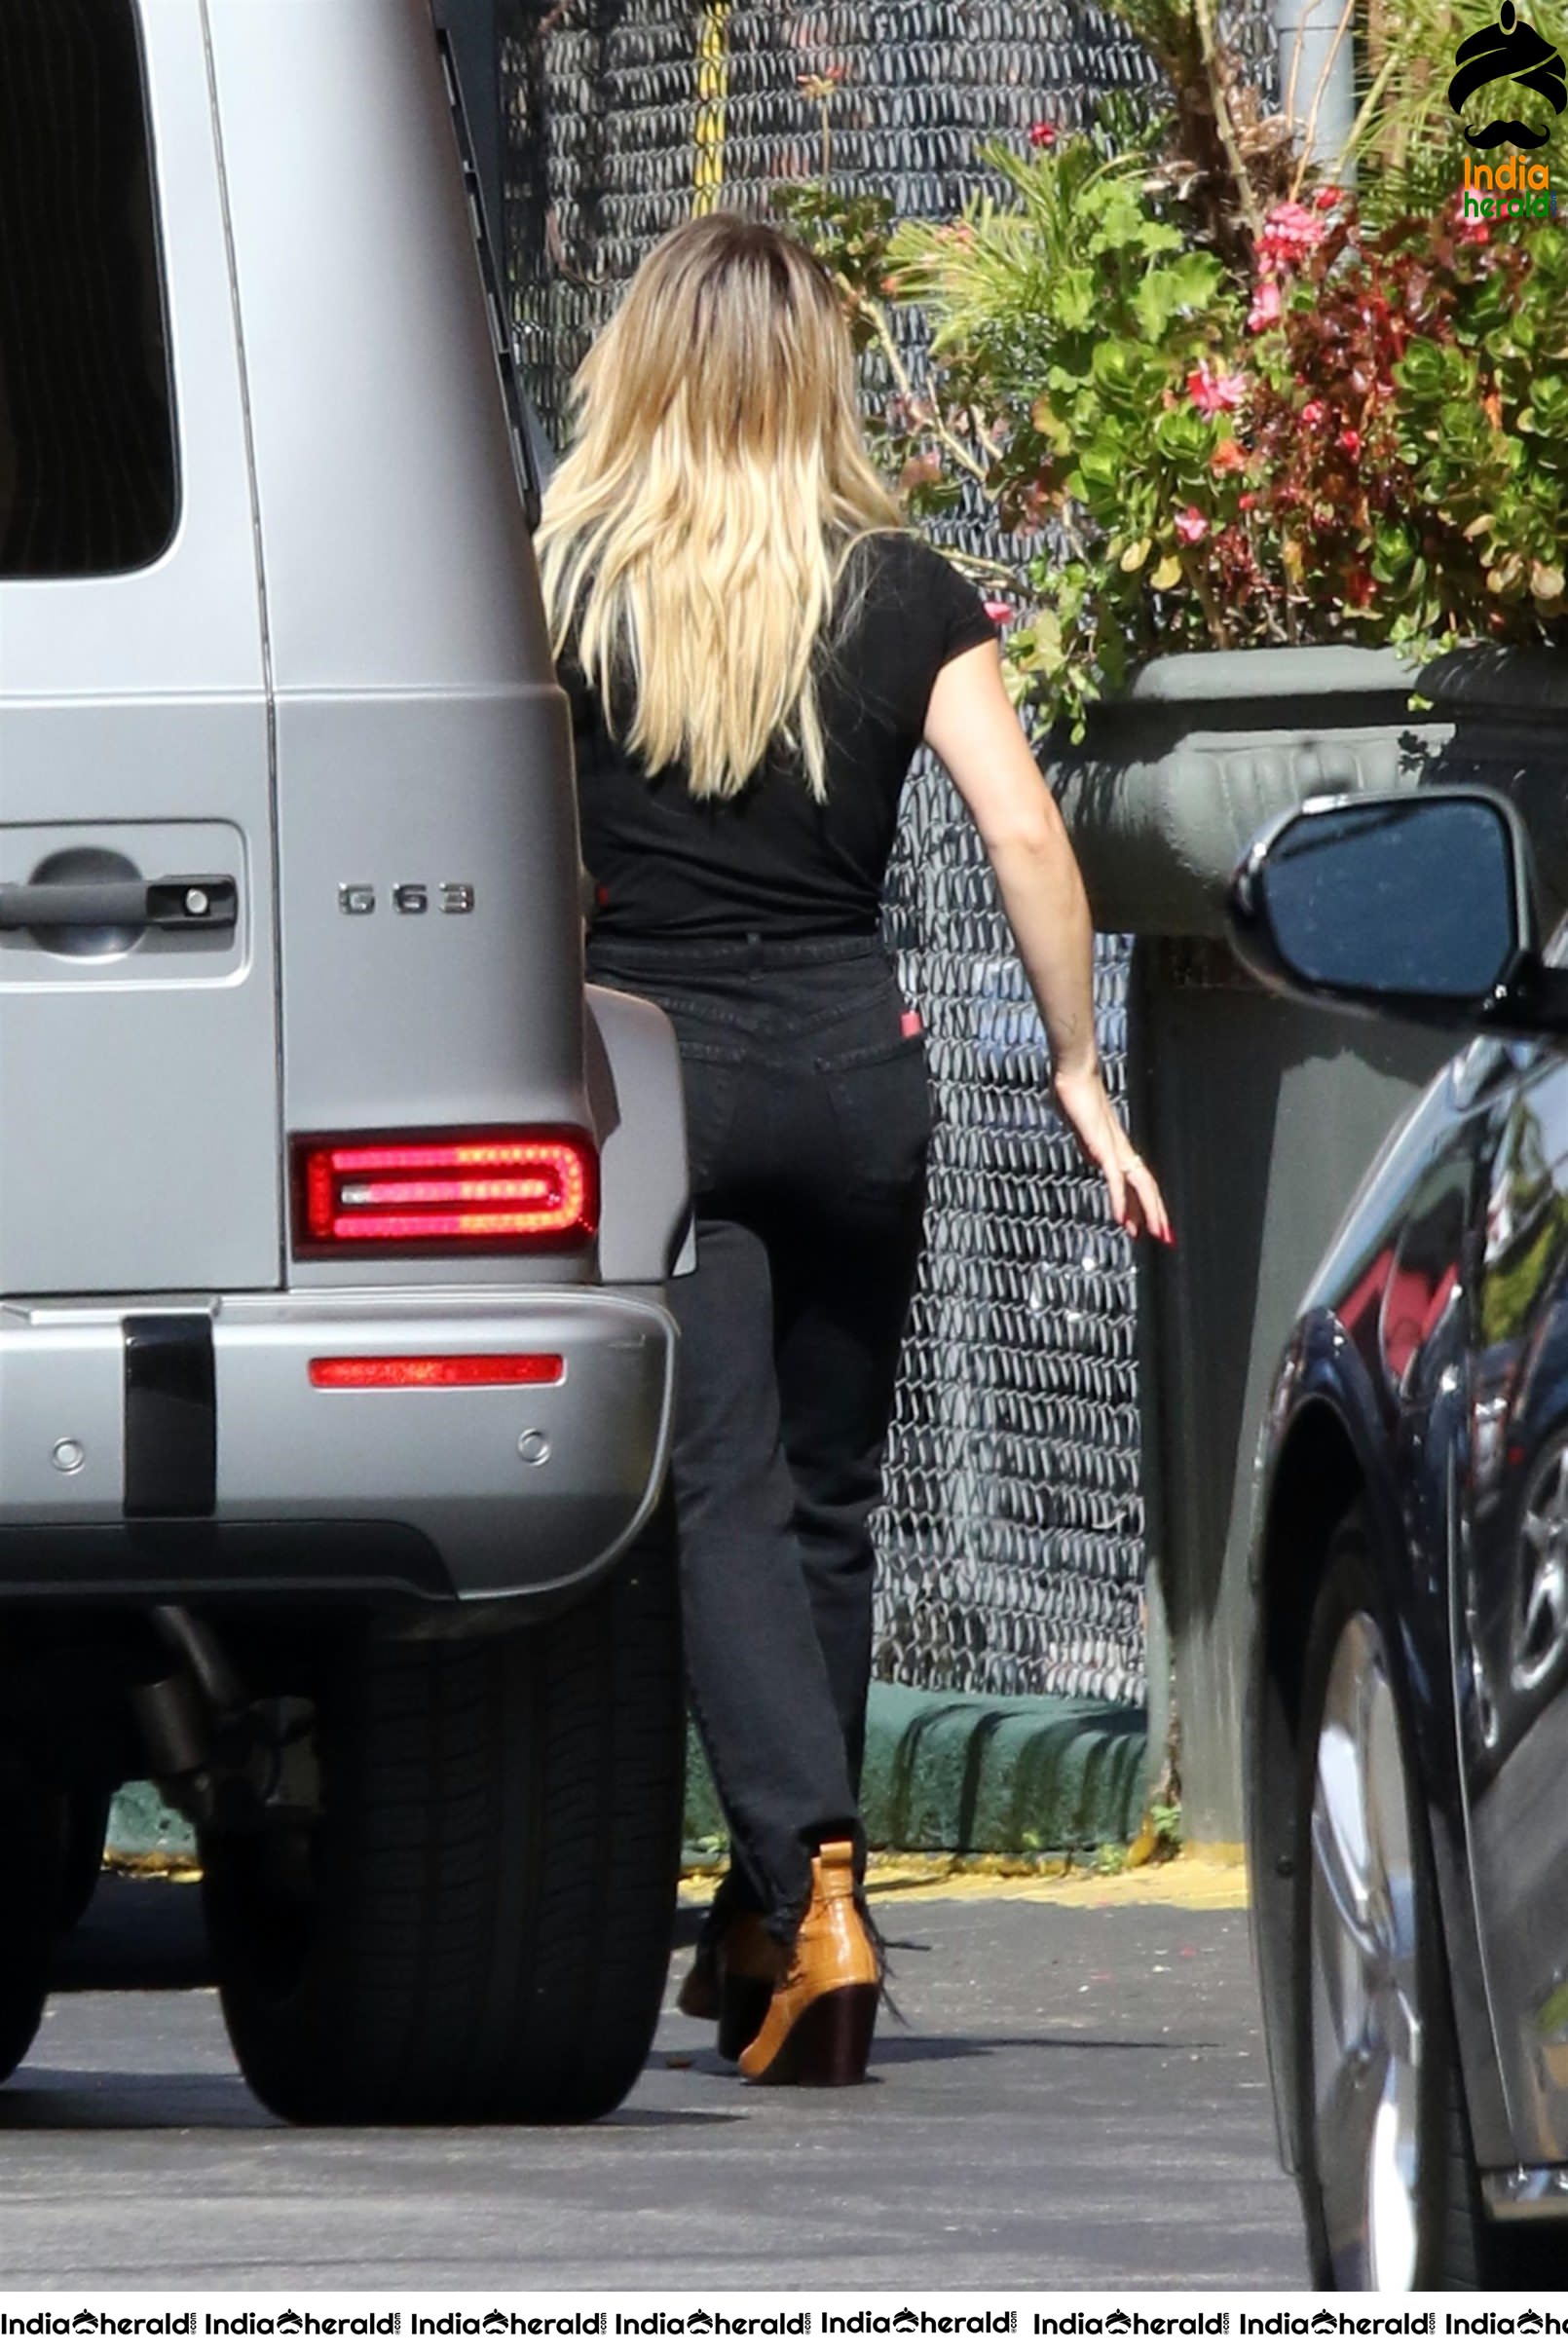 Hilary Duff spotted in Black attire while going to a meeting in Los Angeles